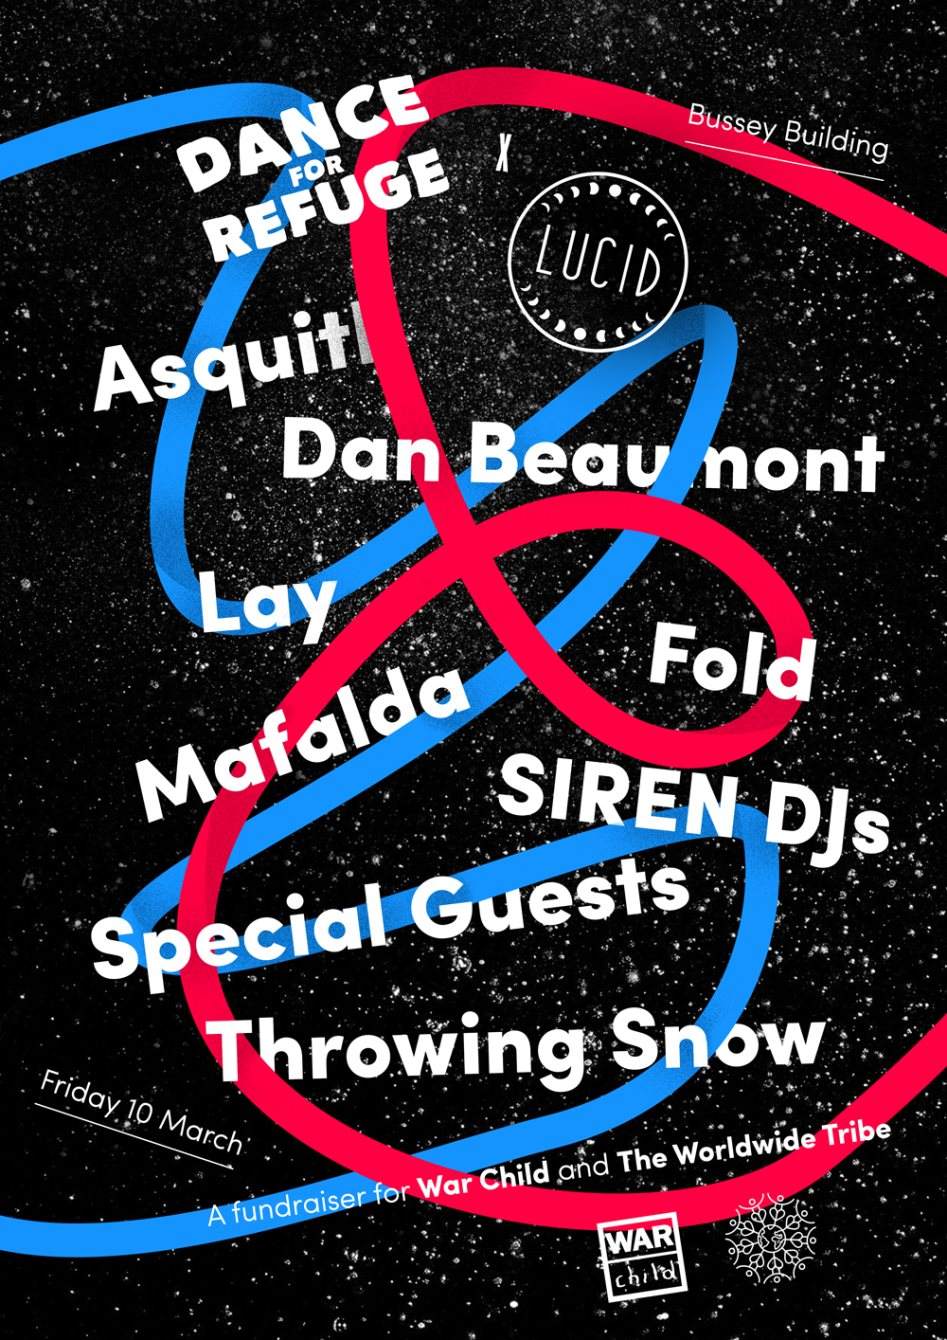 Dance For Refuge x Lucid with Dark Sky, Asquith, Dan Beaumont, Fold, Throwing Snow & More - Página frontal